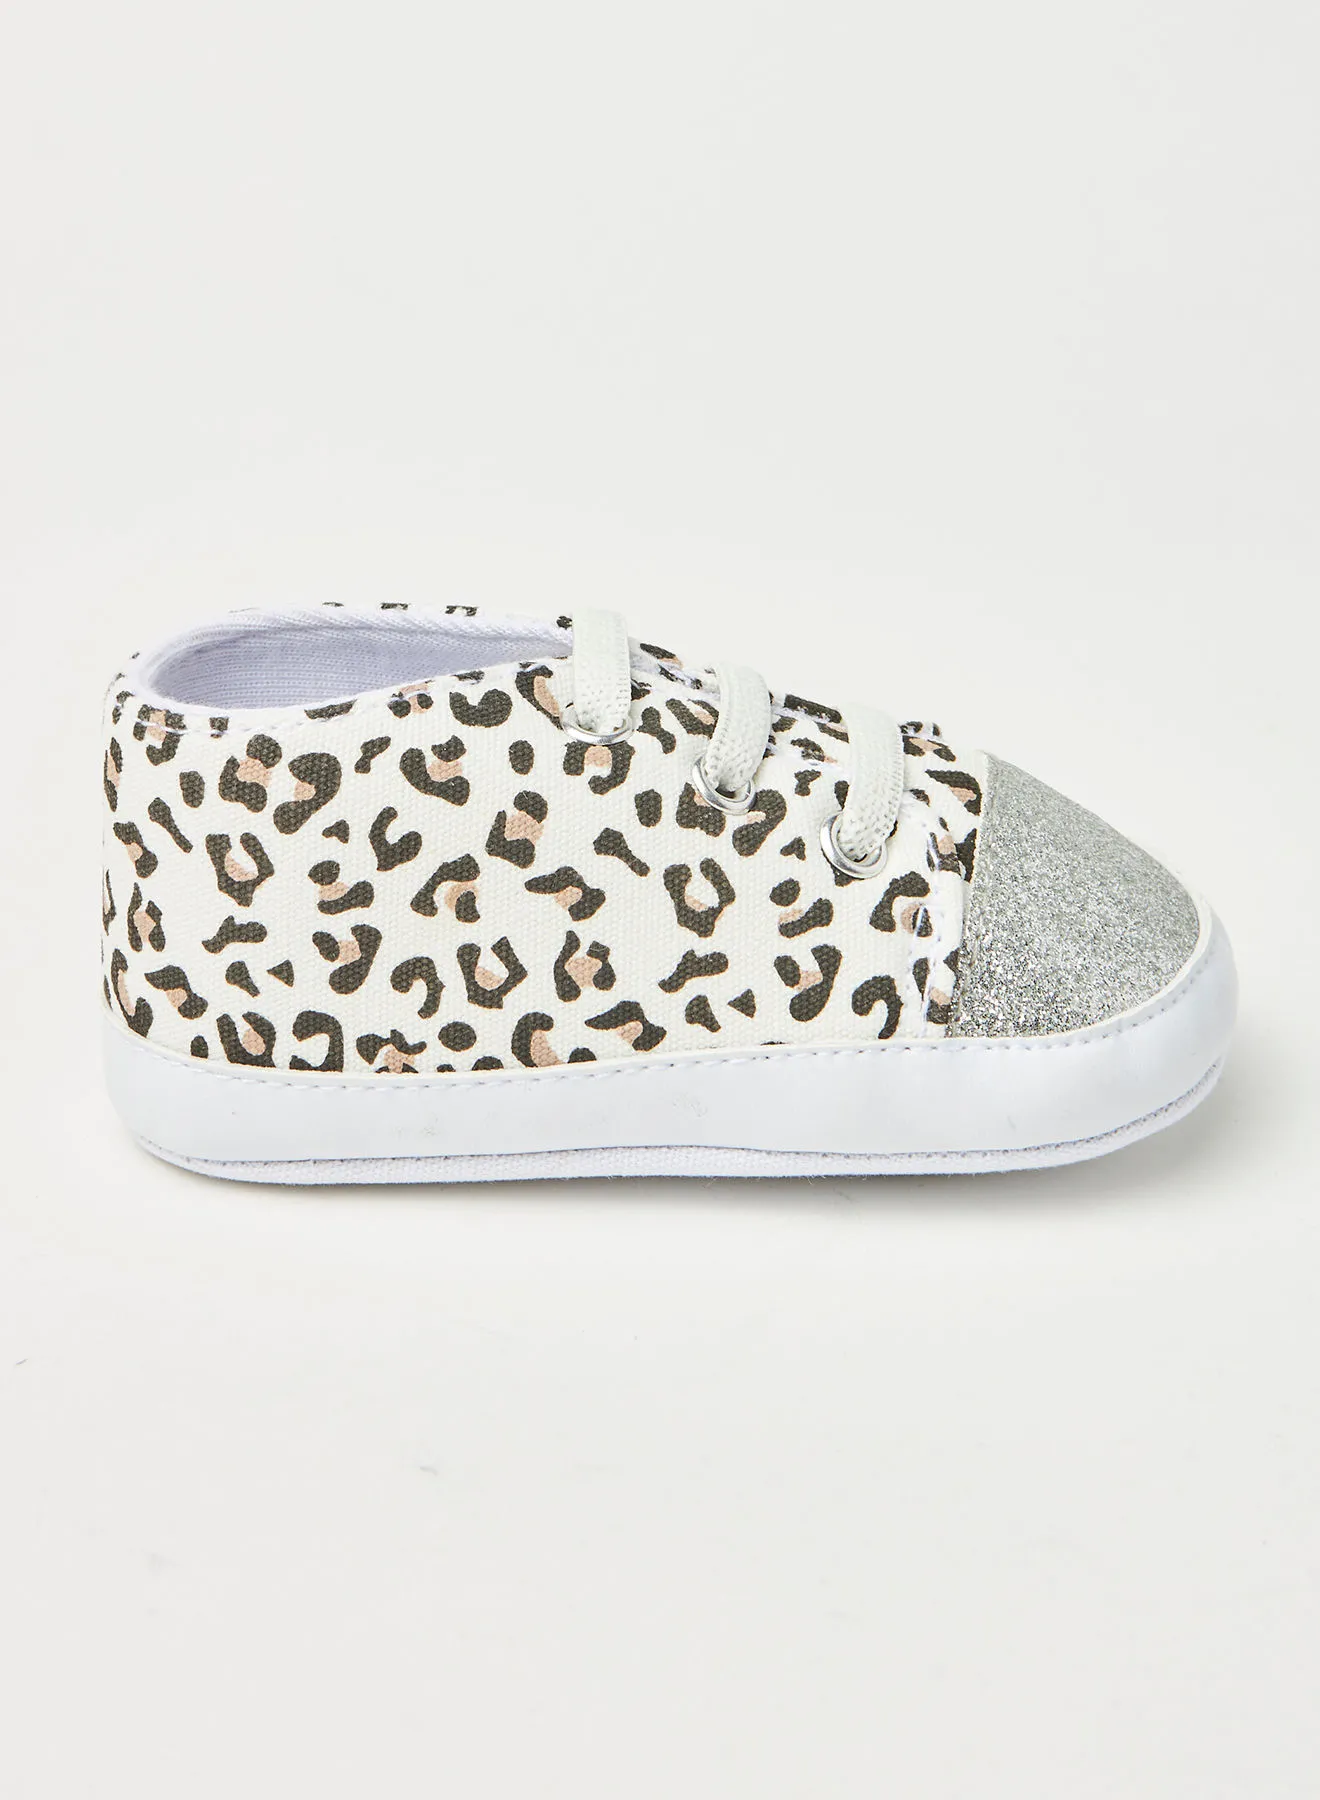 NEON Animal Printed Casual Slip-On Shoes Silver